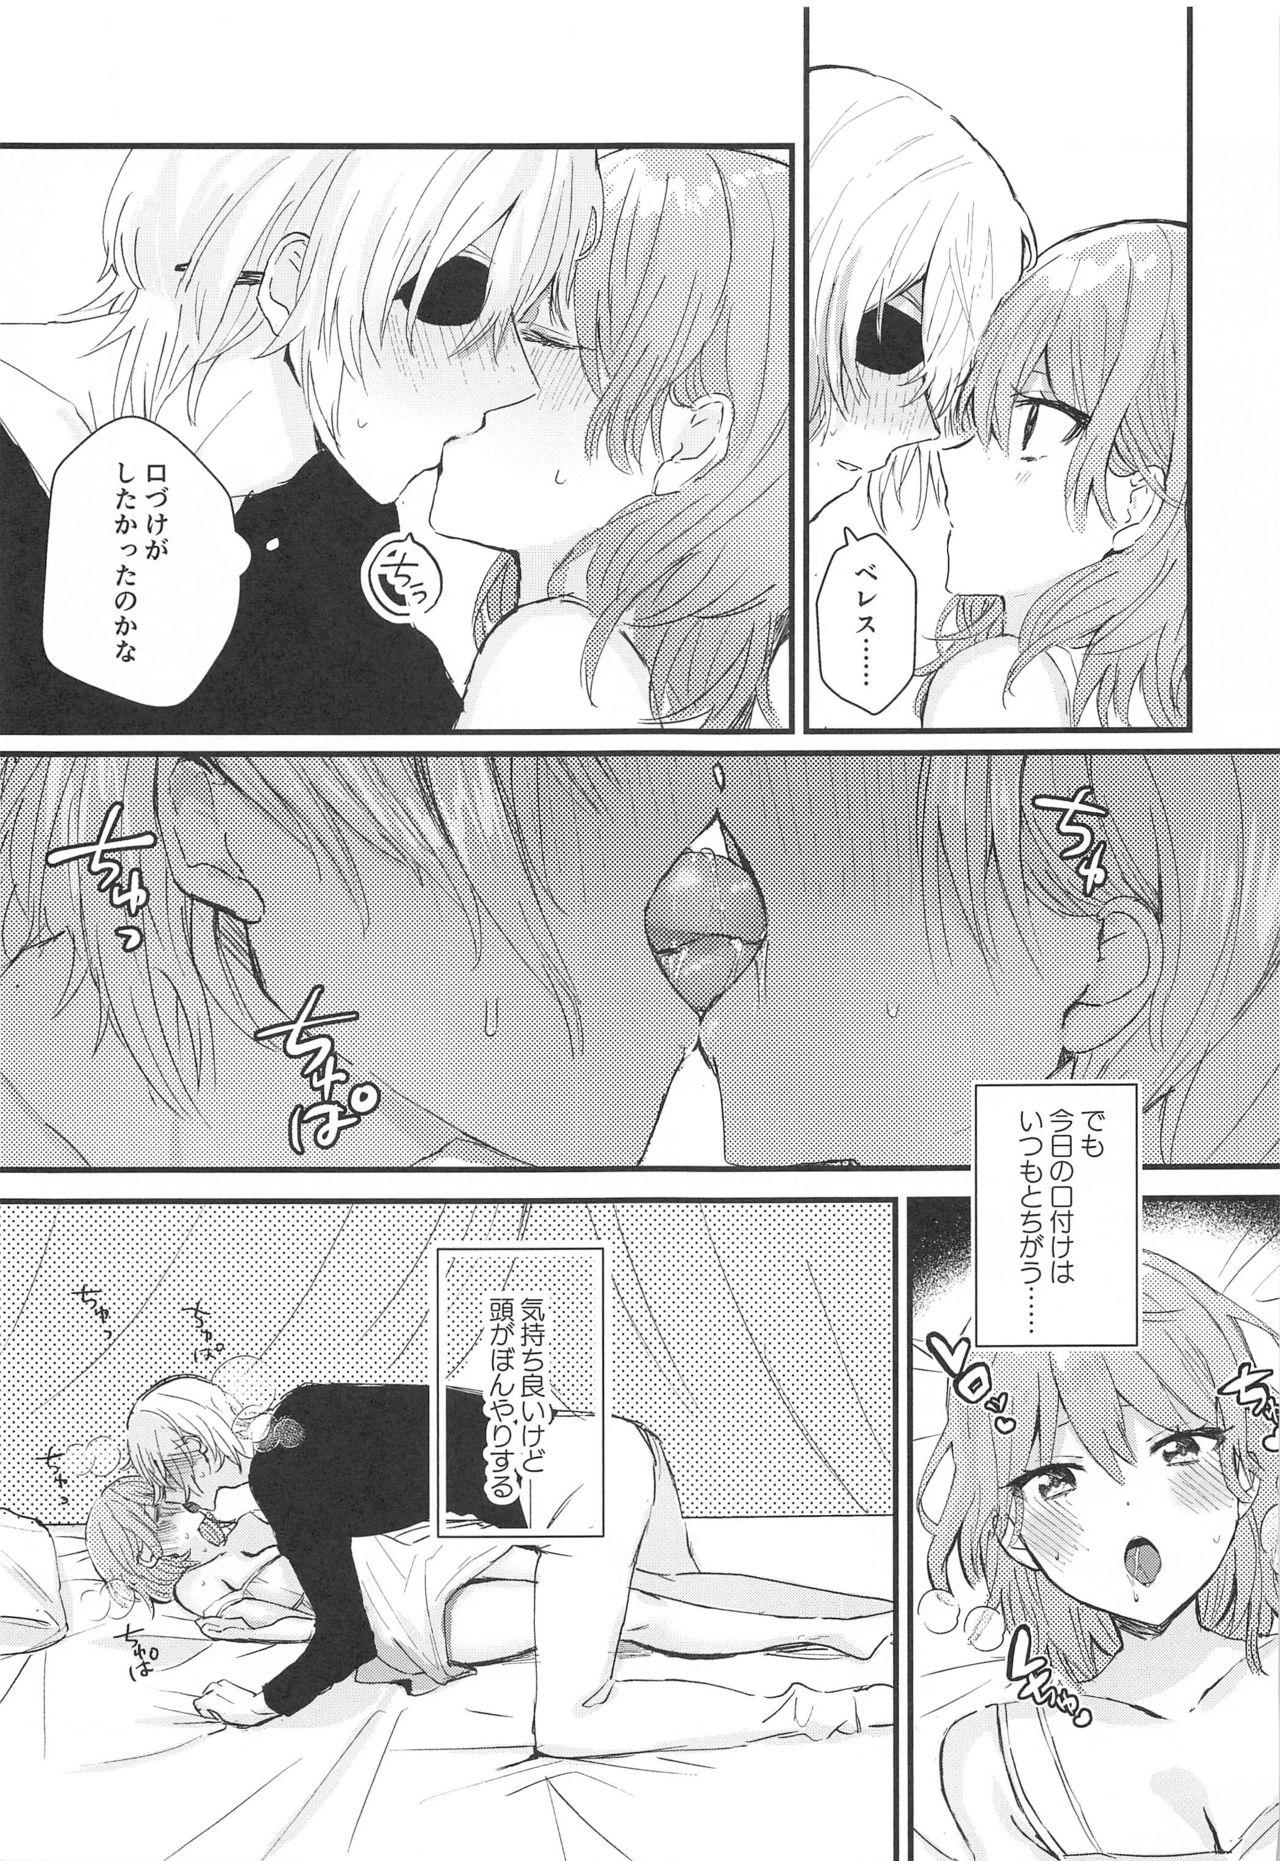 Money Sensei no Hatena - What the professor doesn't know - Fire emblem three houses Ball Licking - Page 6